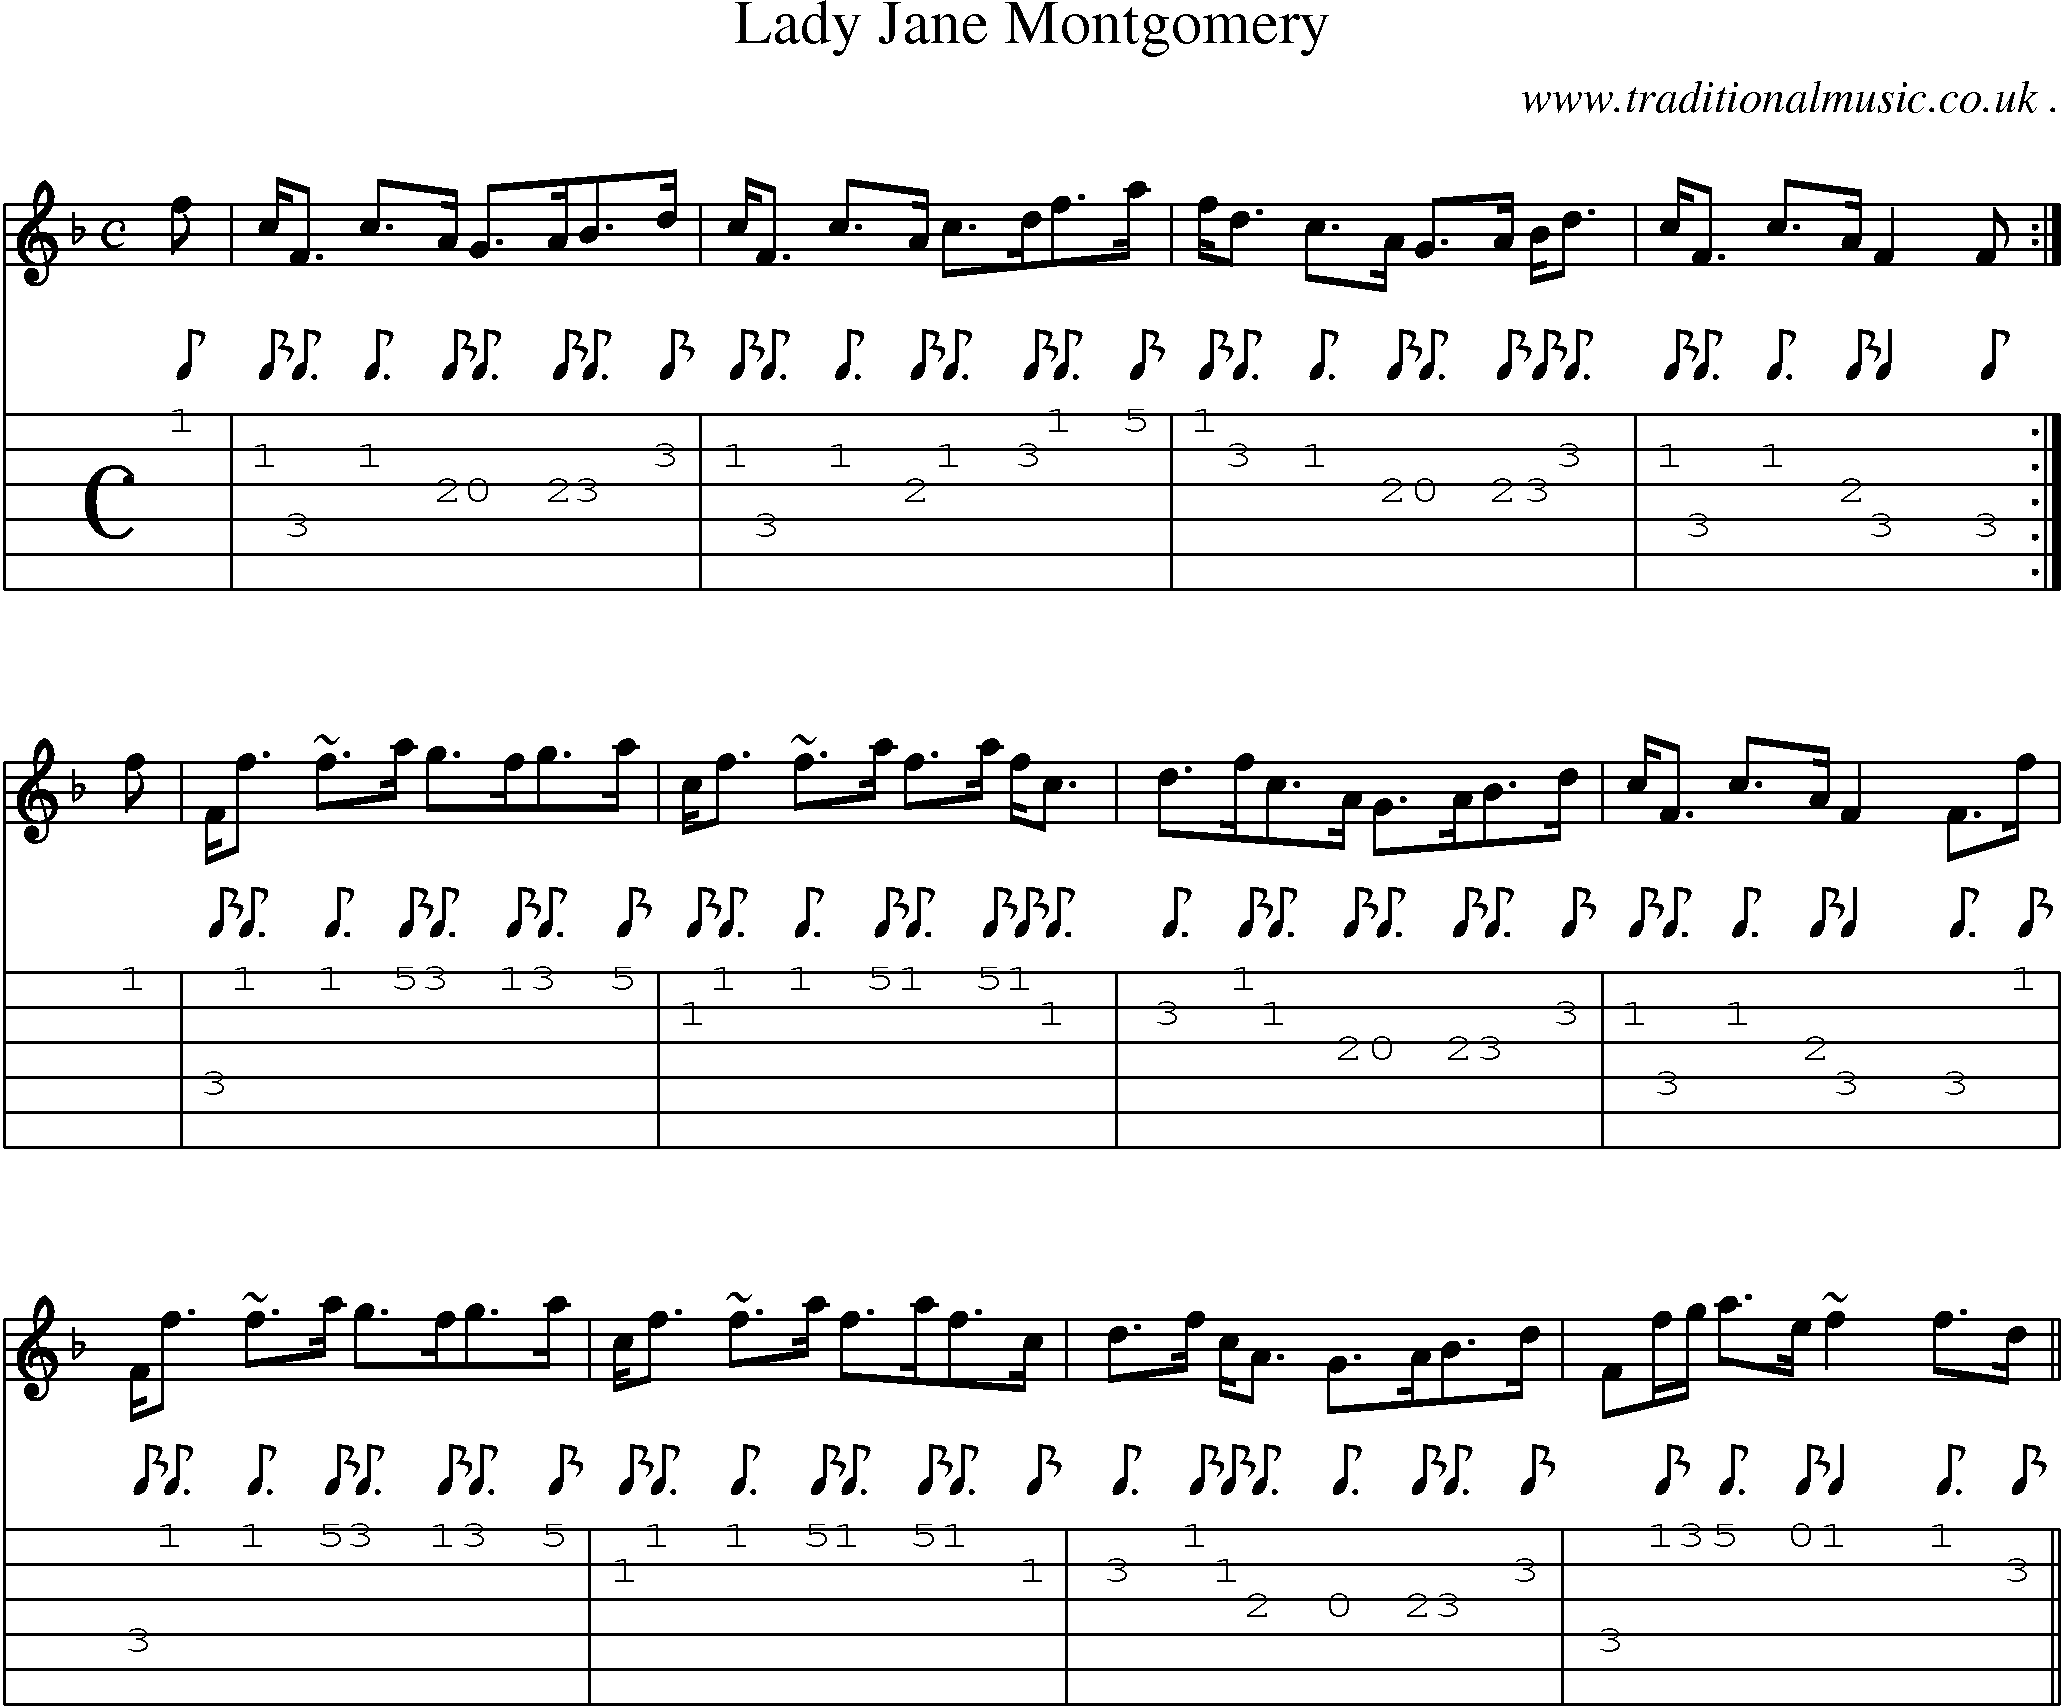 Sheet-music  score, Chords and Guitar Tabs for Lady Jane Montgomery